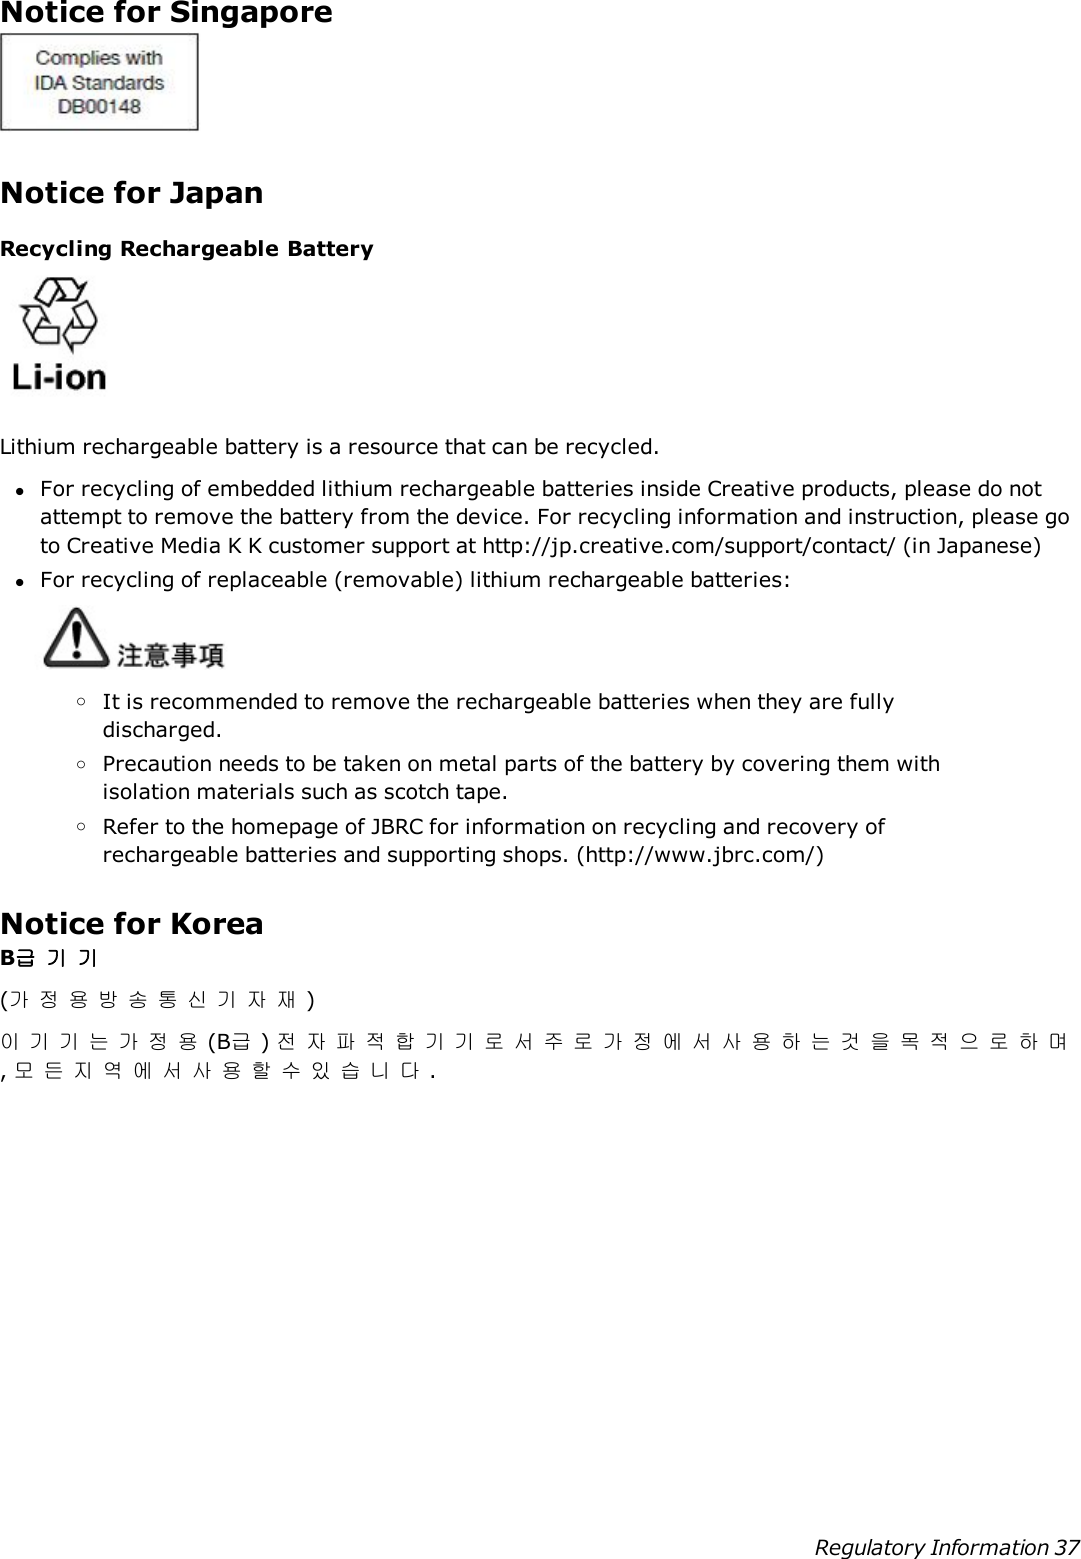 Notice for SingaporeNotice for JapanRecycling Rechargeable BatteryLithium rechargeable battery is a resource that can be recycled.lFor recycling of embedded lithium rechargeable batteries inside Creative products, please do notattempt to remove the battery from the device. For recycling information and instruction, please goto Creative Media K K customer support at http://jp.creative.com/support/contact/ (in Japanese)lFor recycling of replaceable (removable) lithium rechargeable batteries:oIt is recommended to remove the rechargeable batteries when they are fullydischarged.oPrecaution needs to be taken on metal parts of the battery by covering them withisolation materials such as scotch tape.oRefer to the homepage of JBRC for information on recycling and recovery ofrechargeable batteries and supporting shops. (http://www.jbrc.com/)Notice for KoreaB급기기(가정용방송통신기자재)이기기는가정용(B급)전자파적합기기로서주로가정에서사용하는것을목적으로하며,모든지역에서사용할수있습니다.Regulatory Information 37